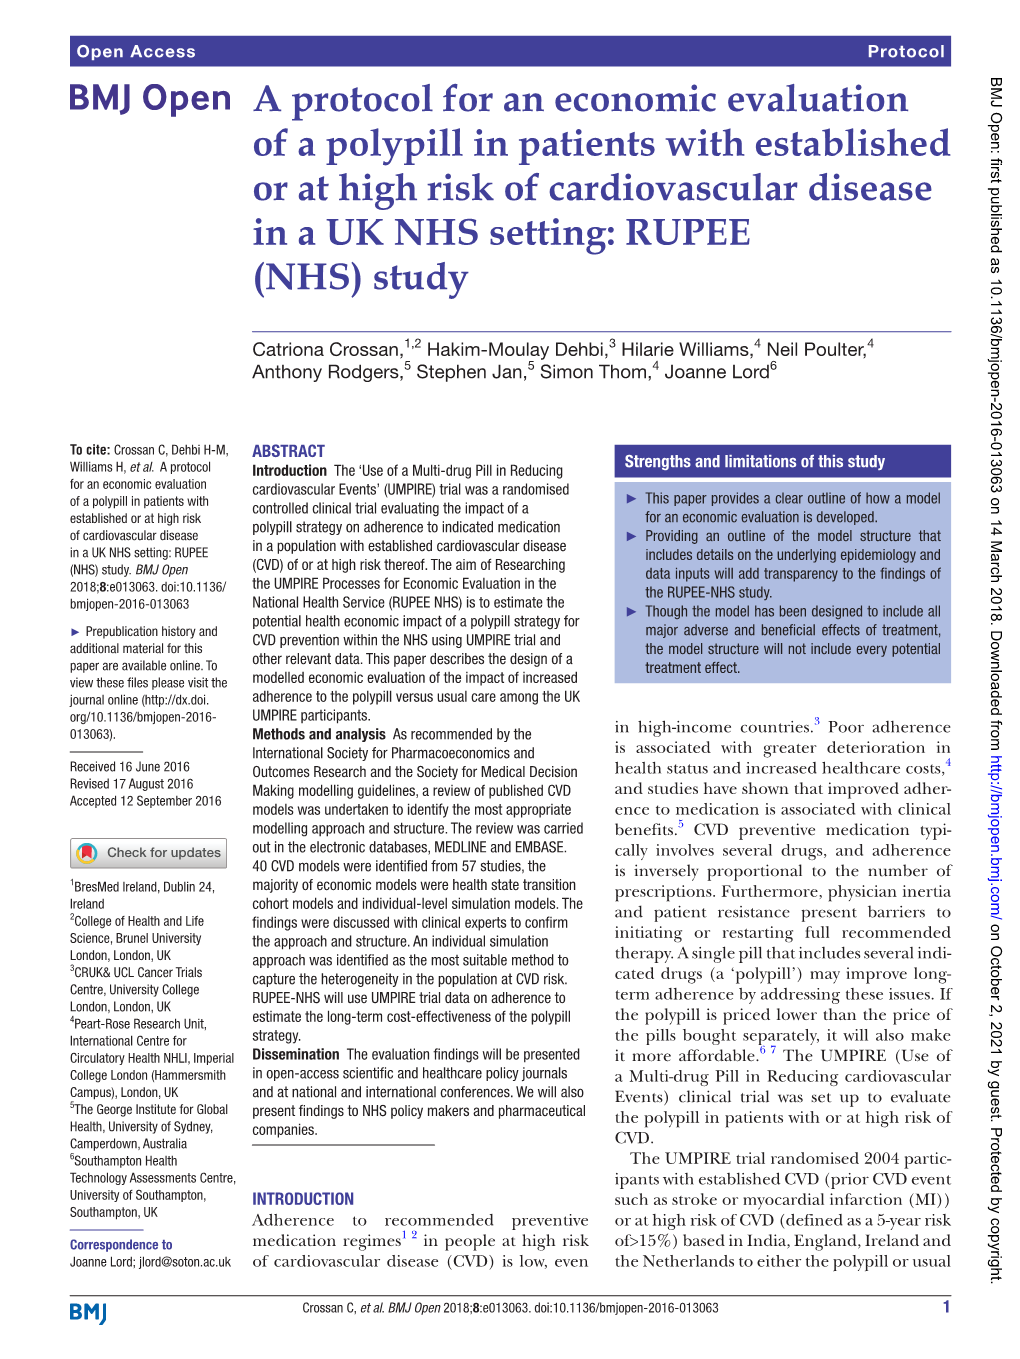 A Protocol for an Economic Evaluation of a Polypill in Patients with Established Or at High Risk of Cardiovascular Disease in a UK NHS Setting: RUPEE (NHS) Study